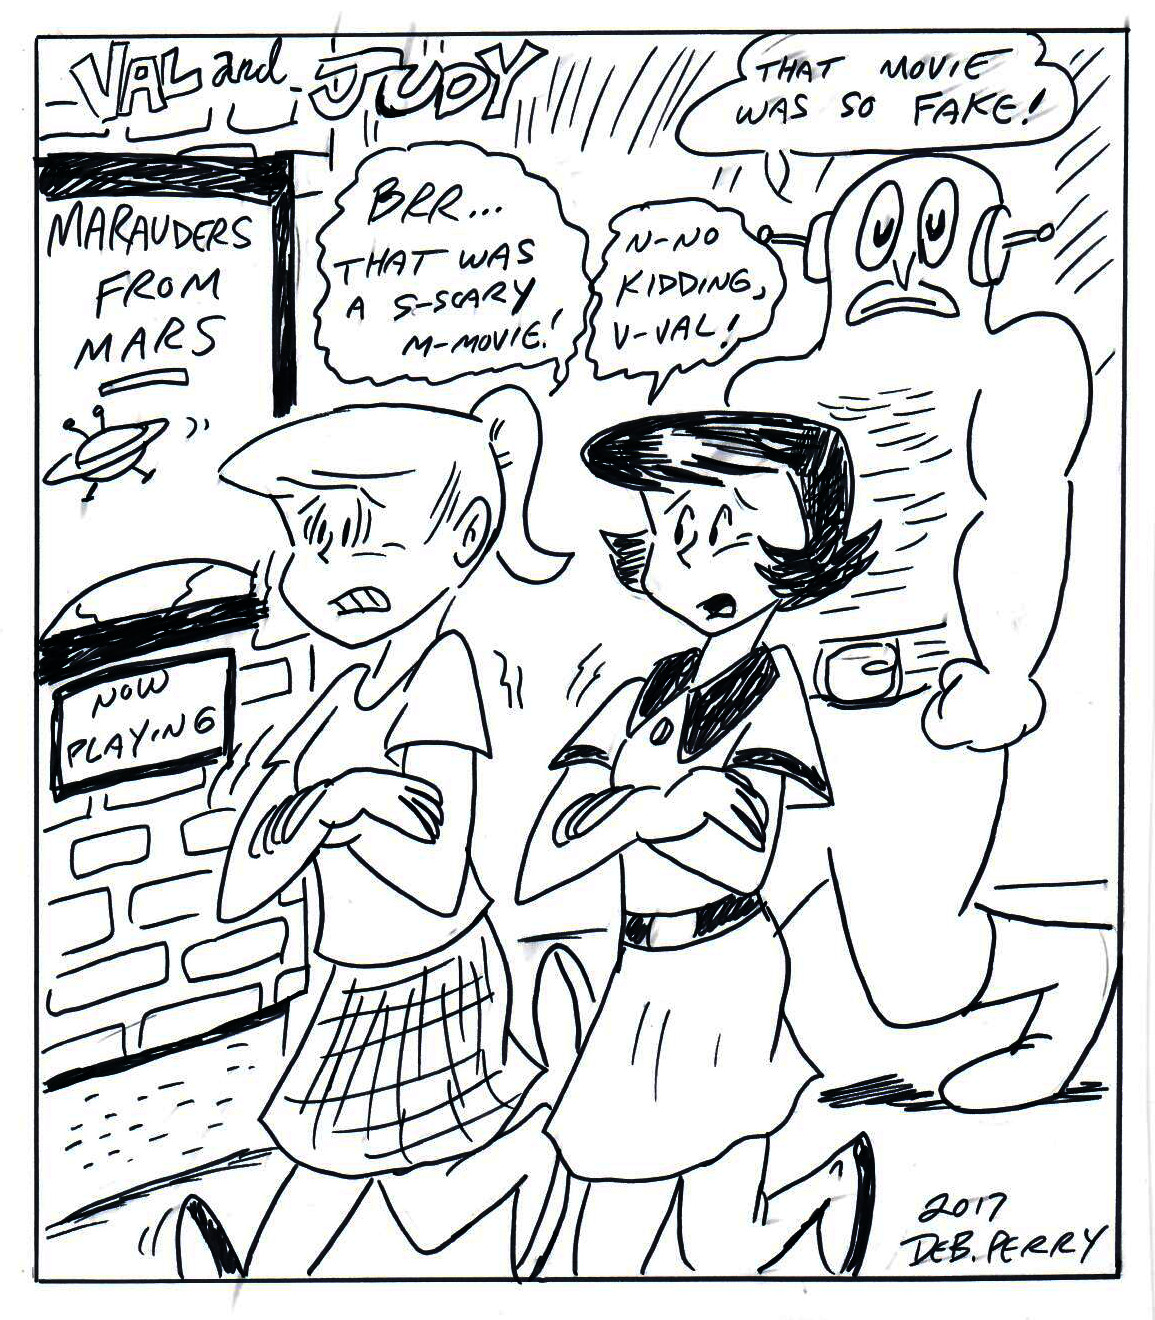 More filler from All-New Popular Comics #2.  Val and Judy were characters created by John Stanley for the Dell Comic 